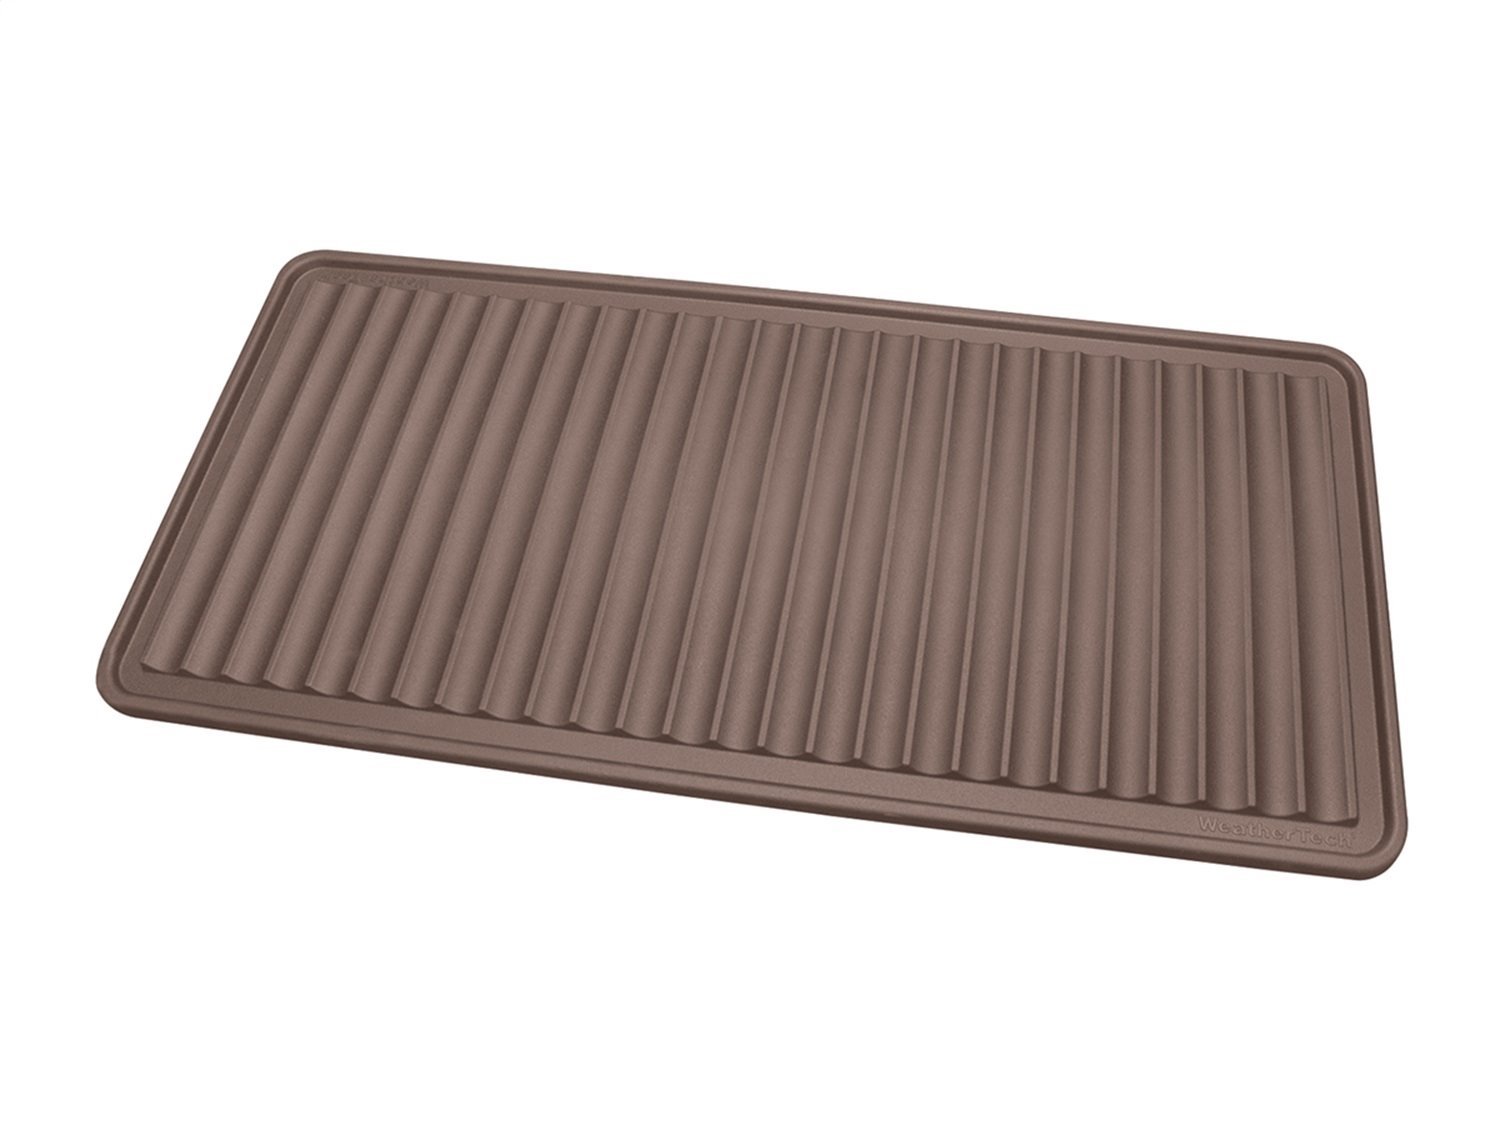 WeatherTech BootTray - Brown